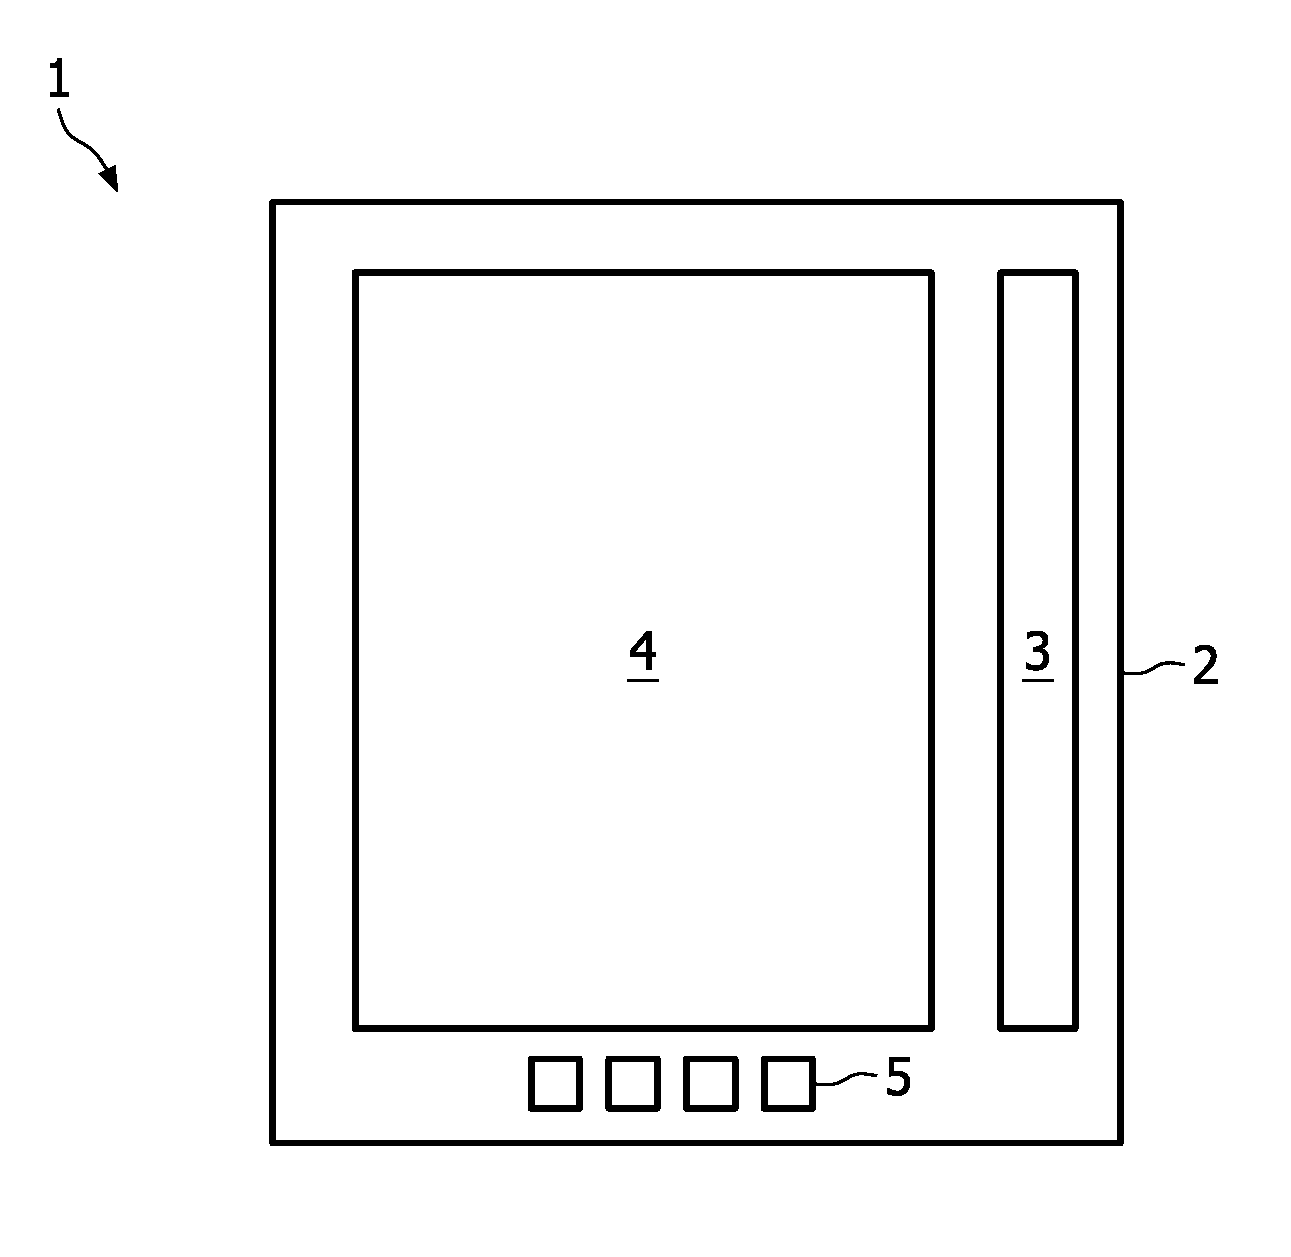 User interface for a multi-point touch sensitive device